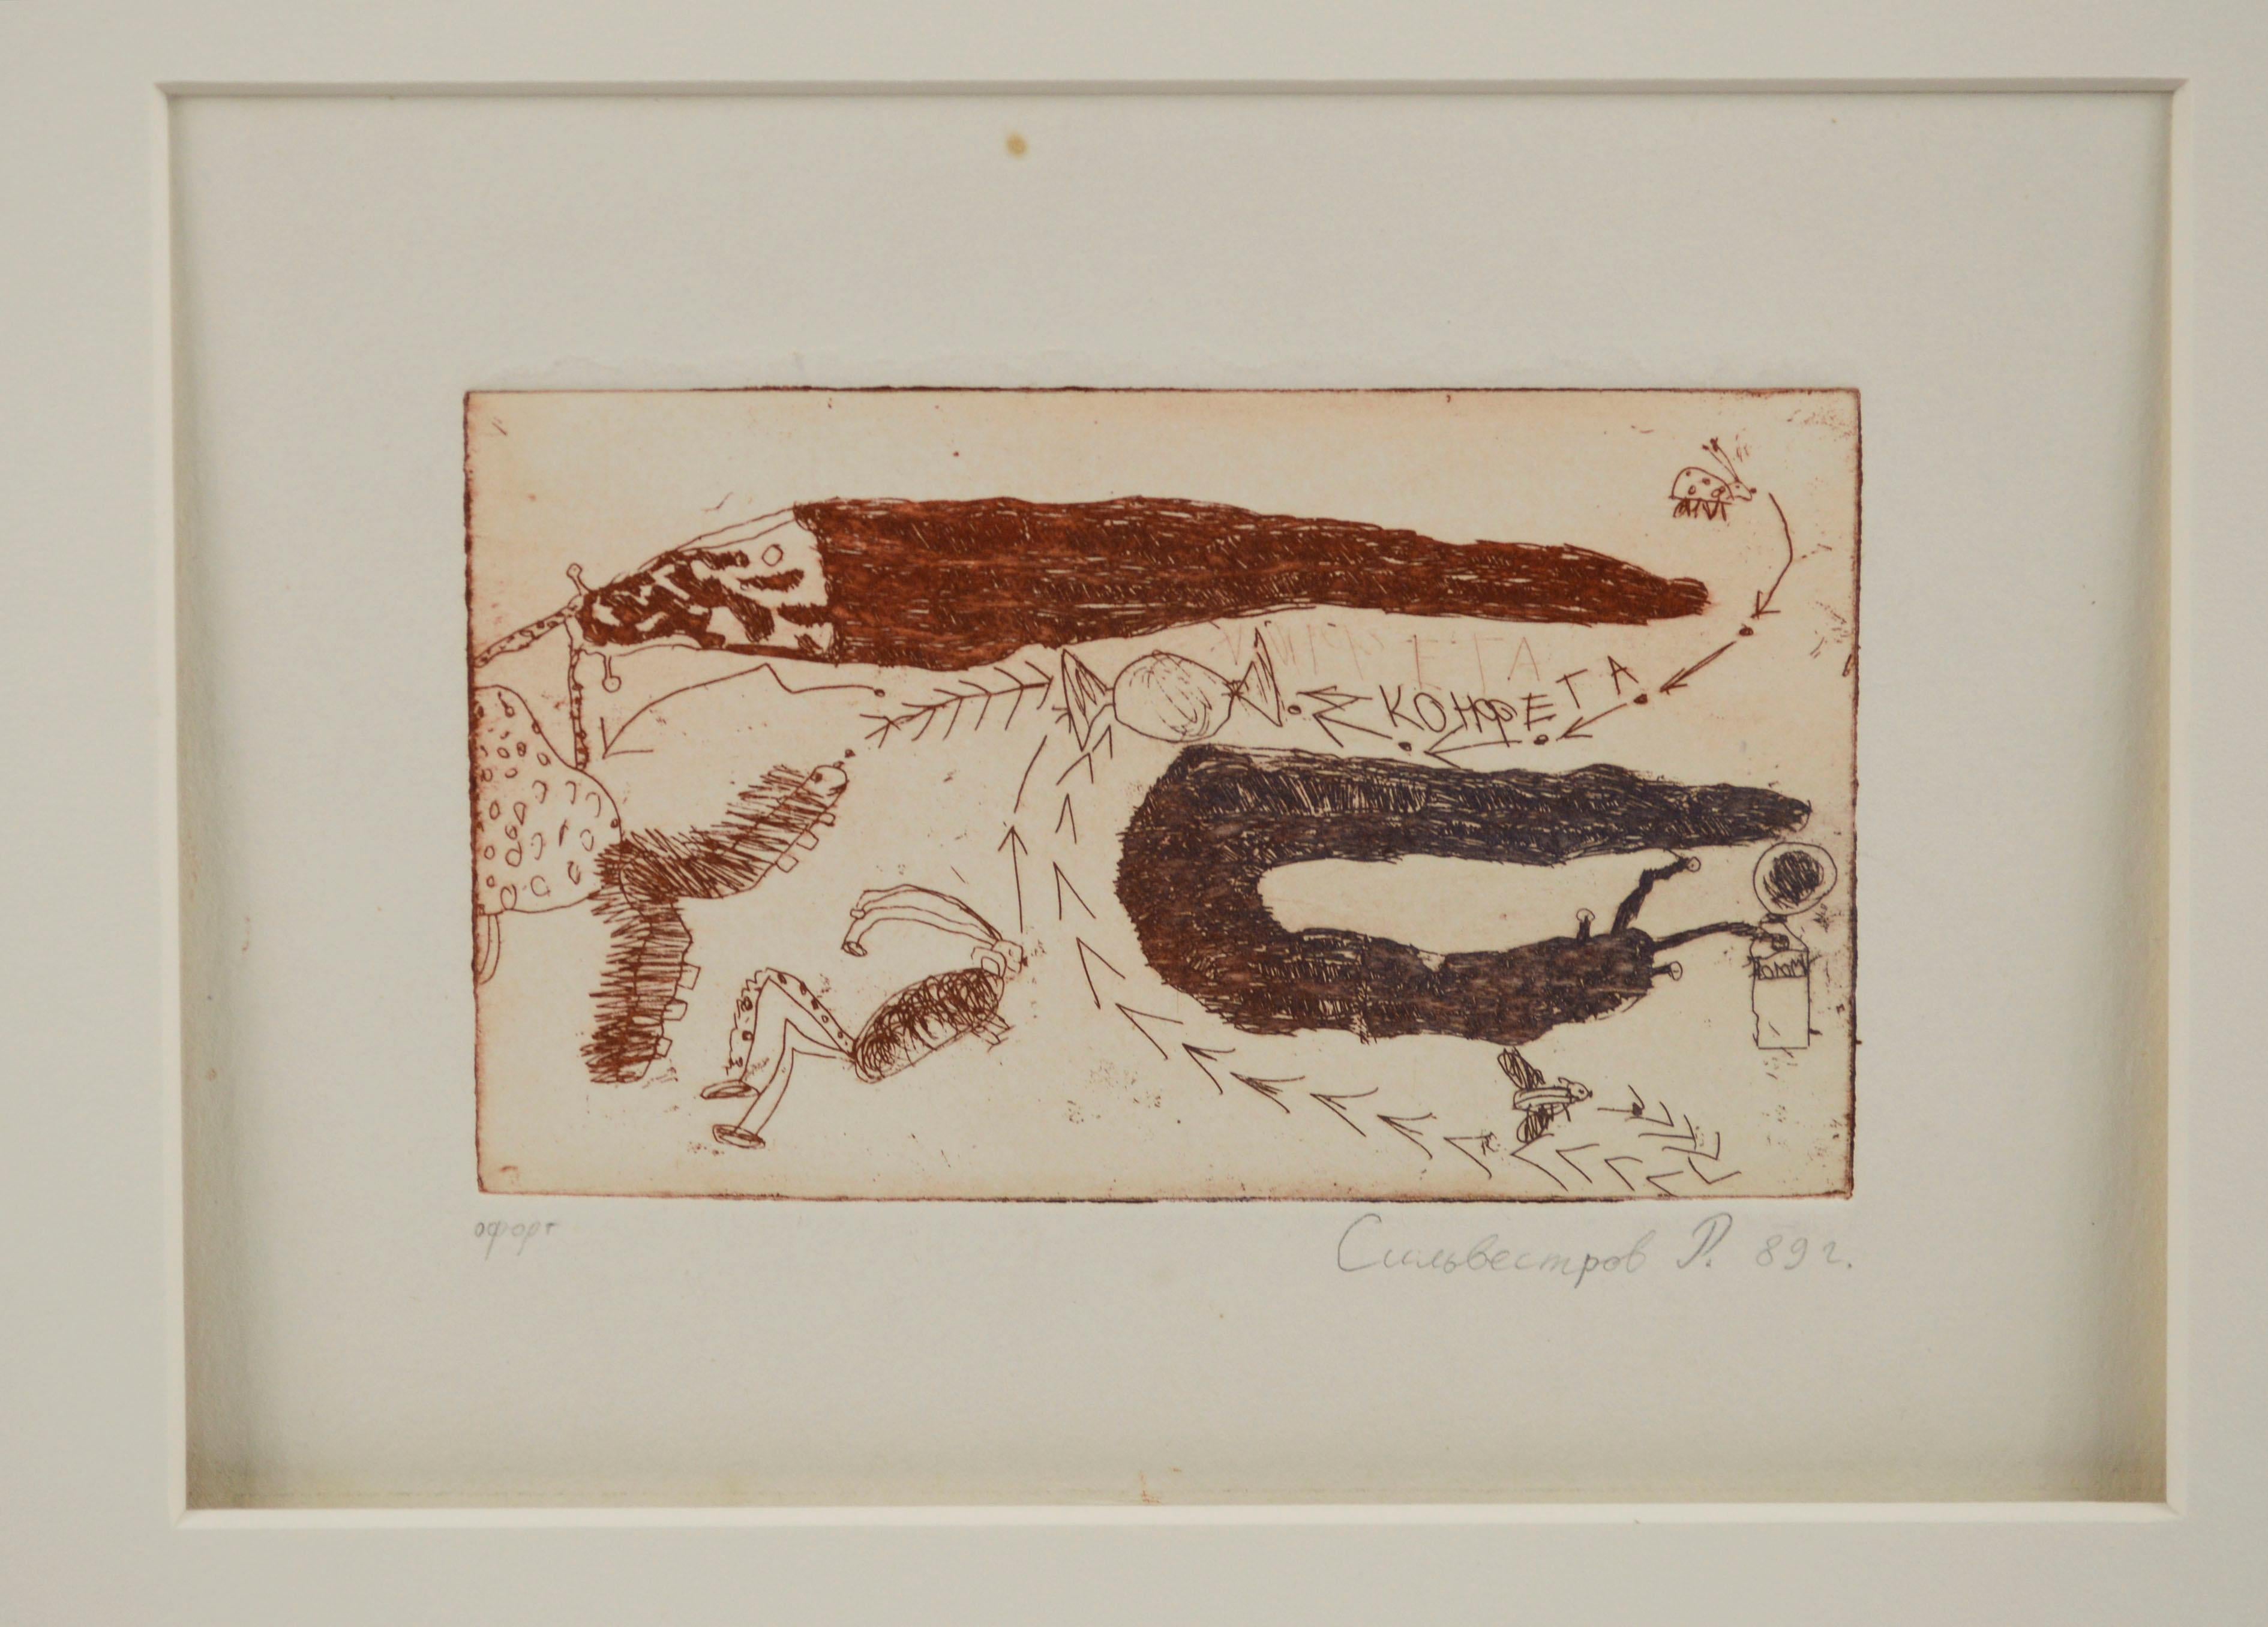 An abstract expressionist miniature etching on paper depicting a numerous different insects following a line of arrows by R. Silvestrov (Russian). Signed and dated in Russian lower right and titled in Russian 